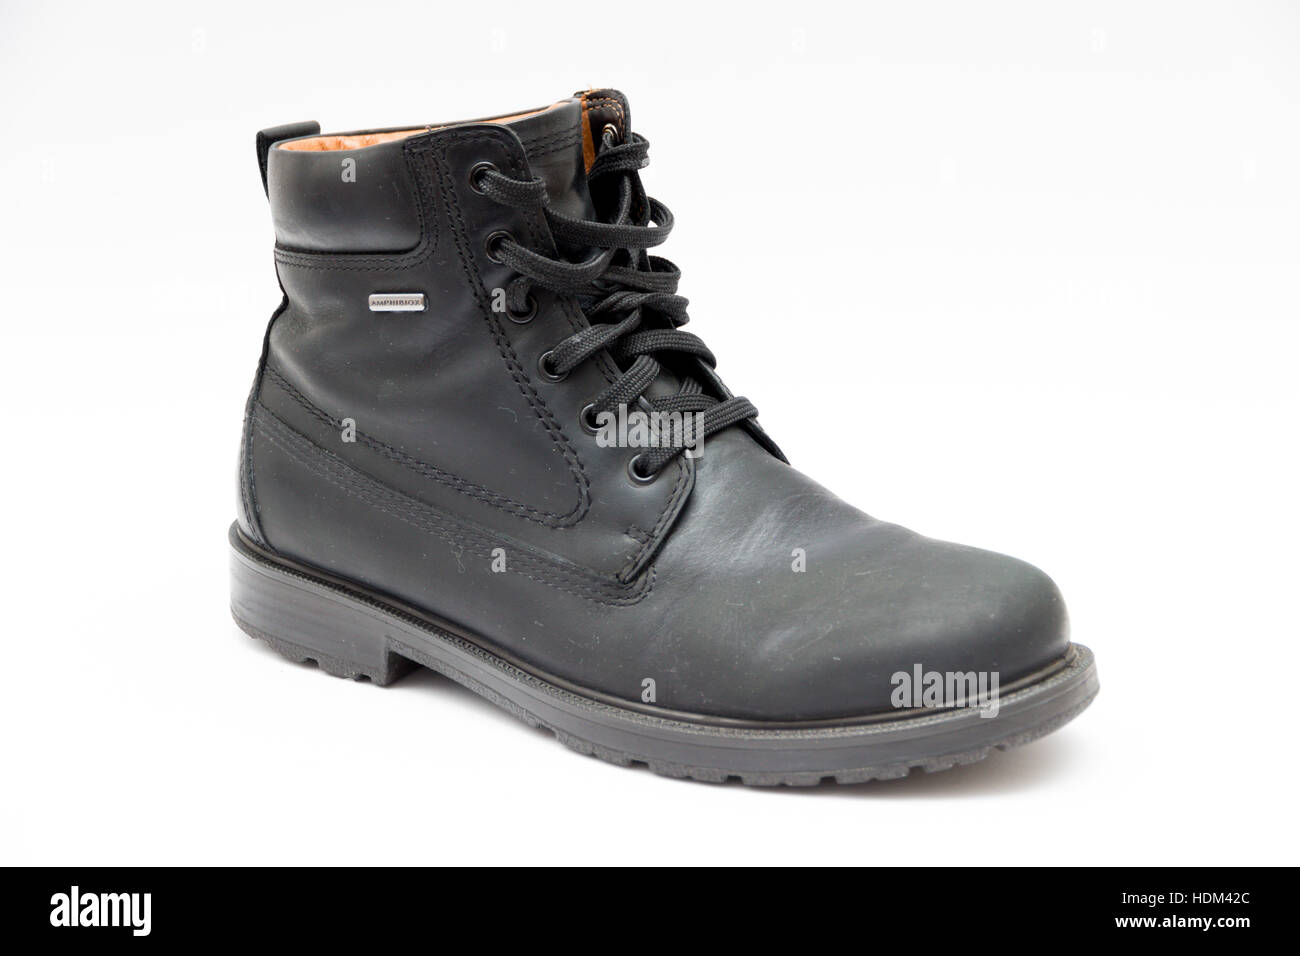 Geox Shoes High Resolution Stock Photography and Images - Alamy